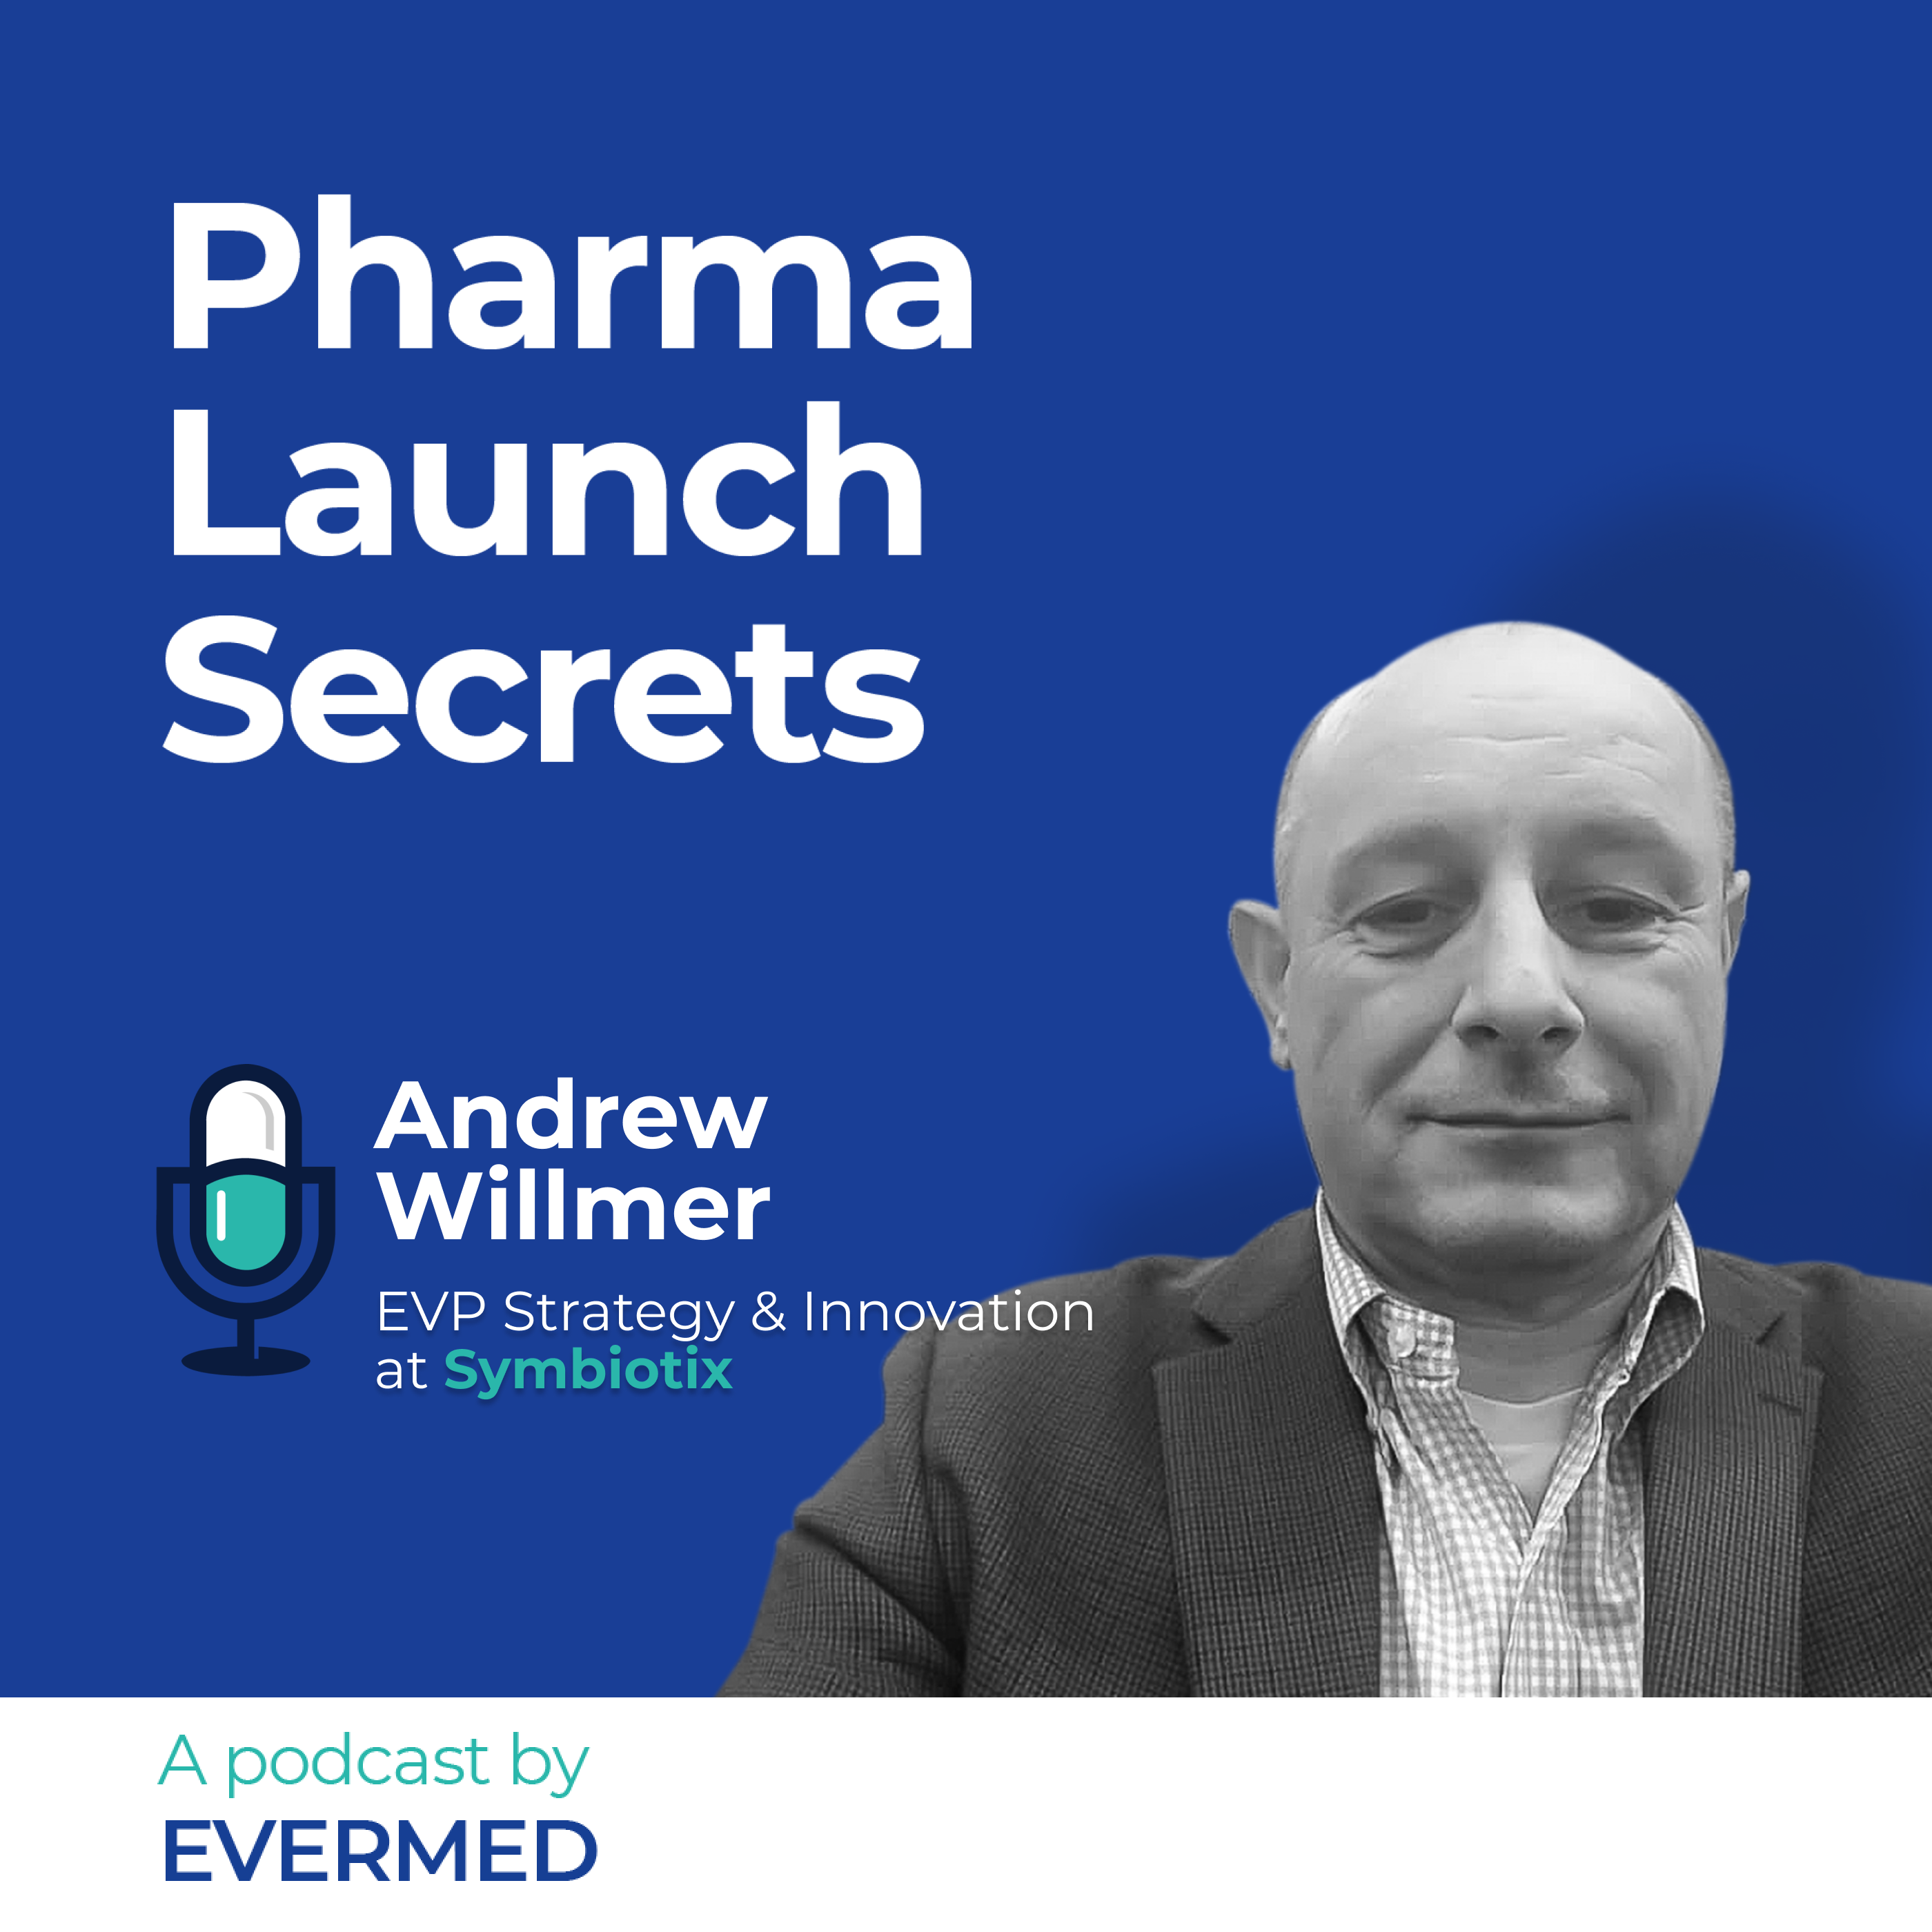 Peer-to-Peer Programs and Pharma Launches: Opportunities to Engage HCPs Using Short-Form, Trusted, Clinically Relevant Information with Andrew Willmer, EVP of Strategy and Innovation at Symbiotix